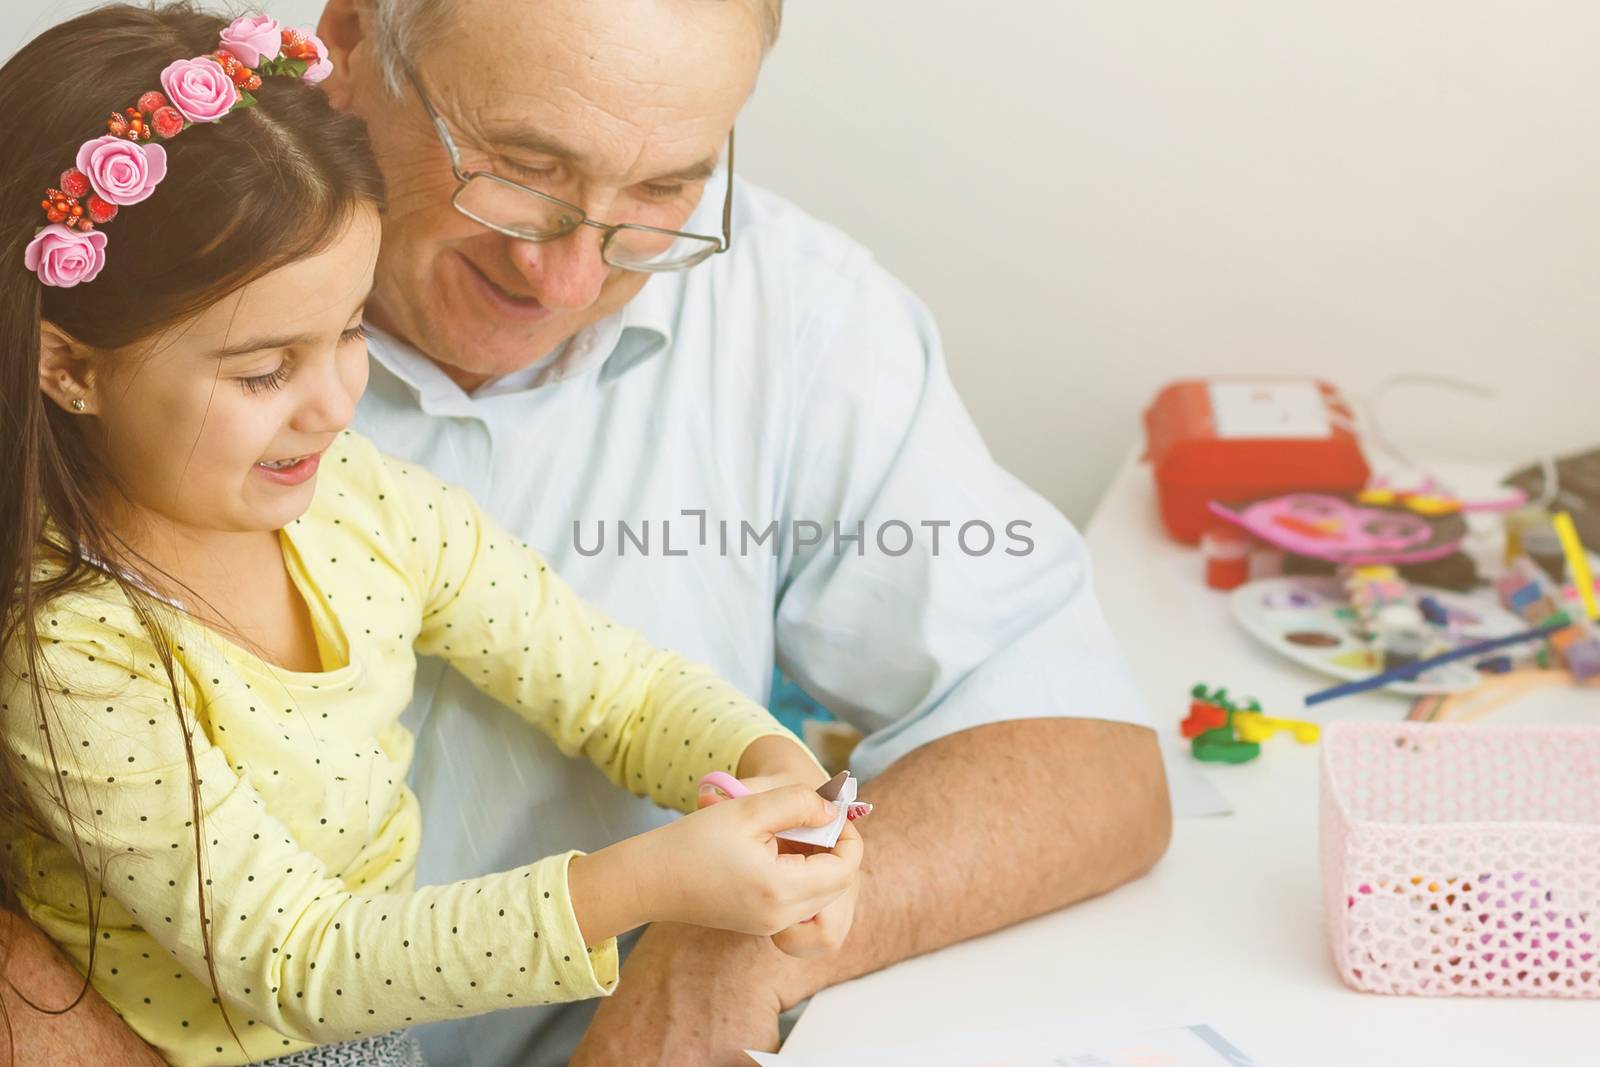 Caring grandfather doing home assignment together with granddaughter by Andelov13